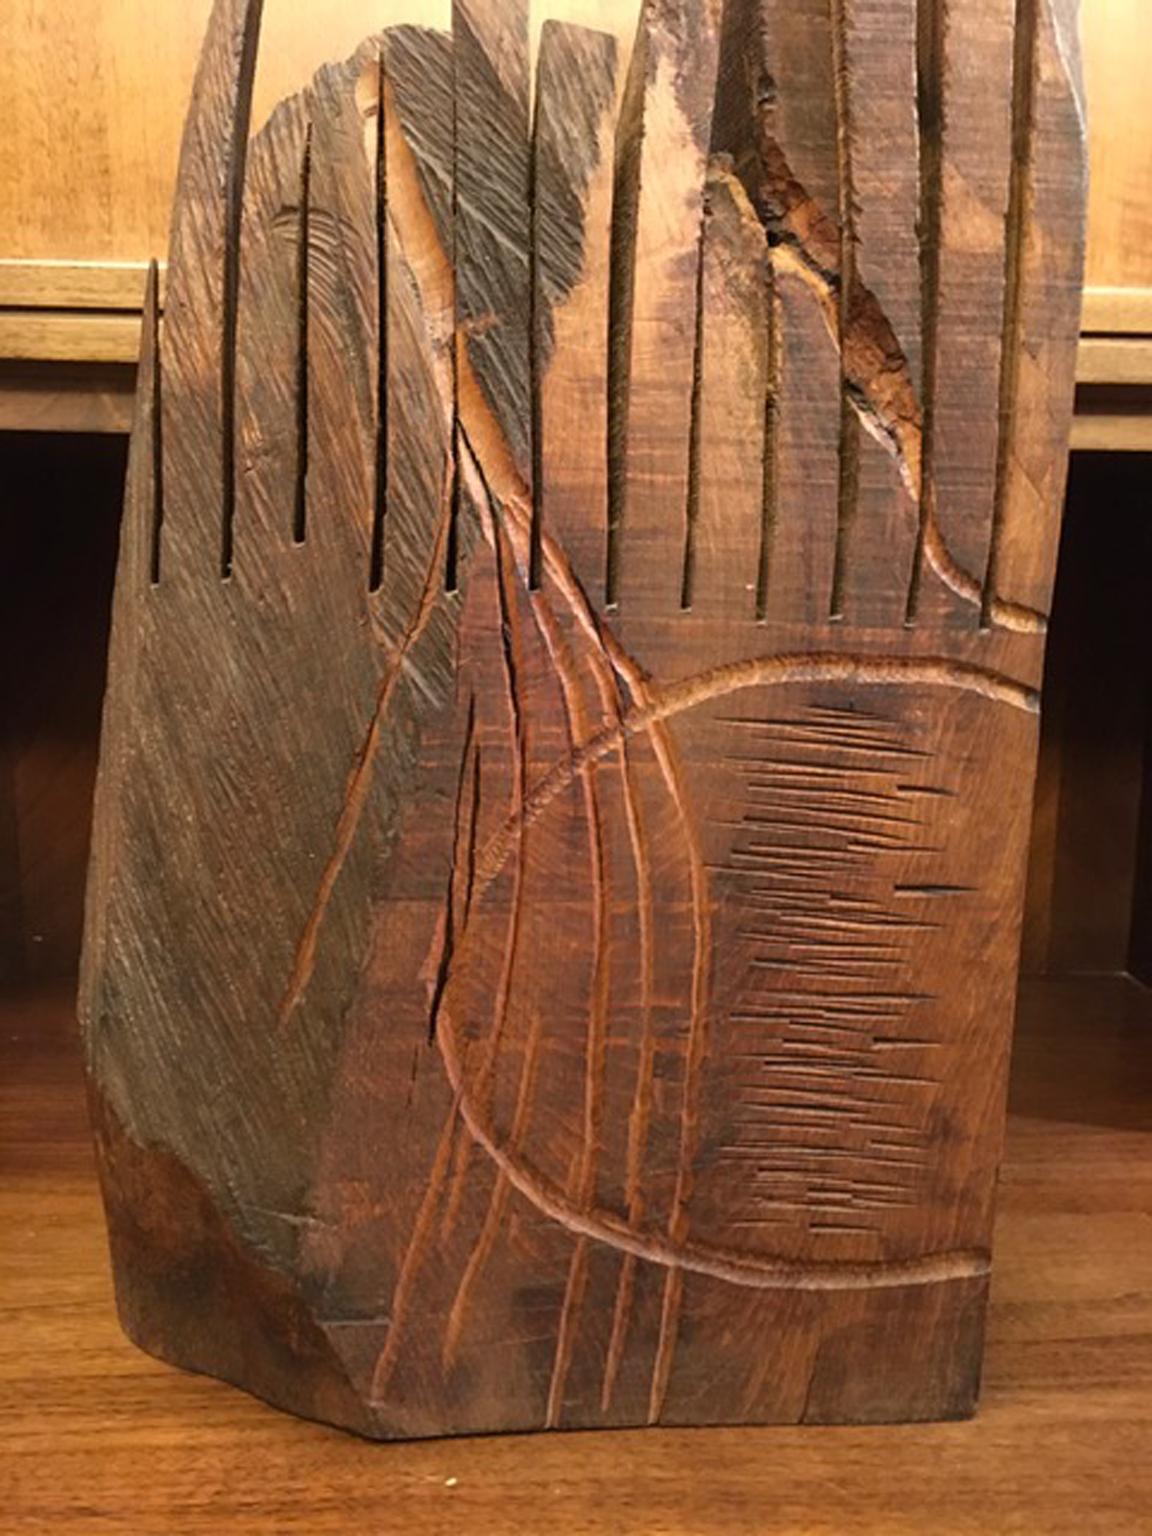 Franca Vitti was an Italian, Northern Italy based, artist well known also for her iron artworks.
She spent a part of her life in Africa and for this reason this piece sculpted in raw pine wood, shows a great primordial force. 
For its natural spirit